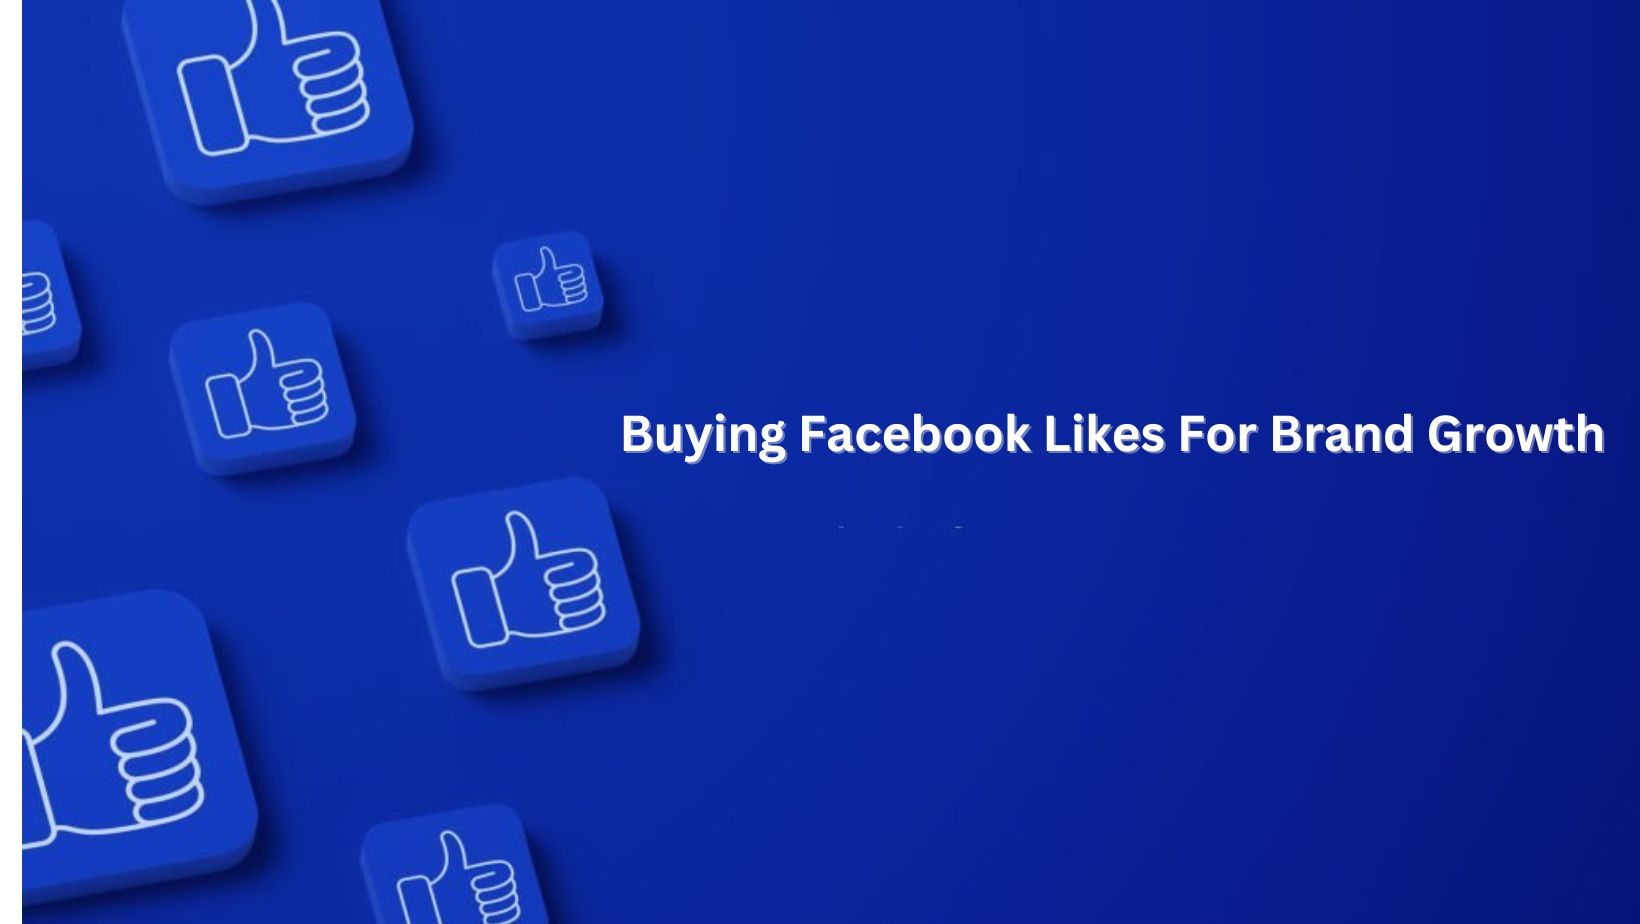 Buying Facebook Likes For Brand Growth